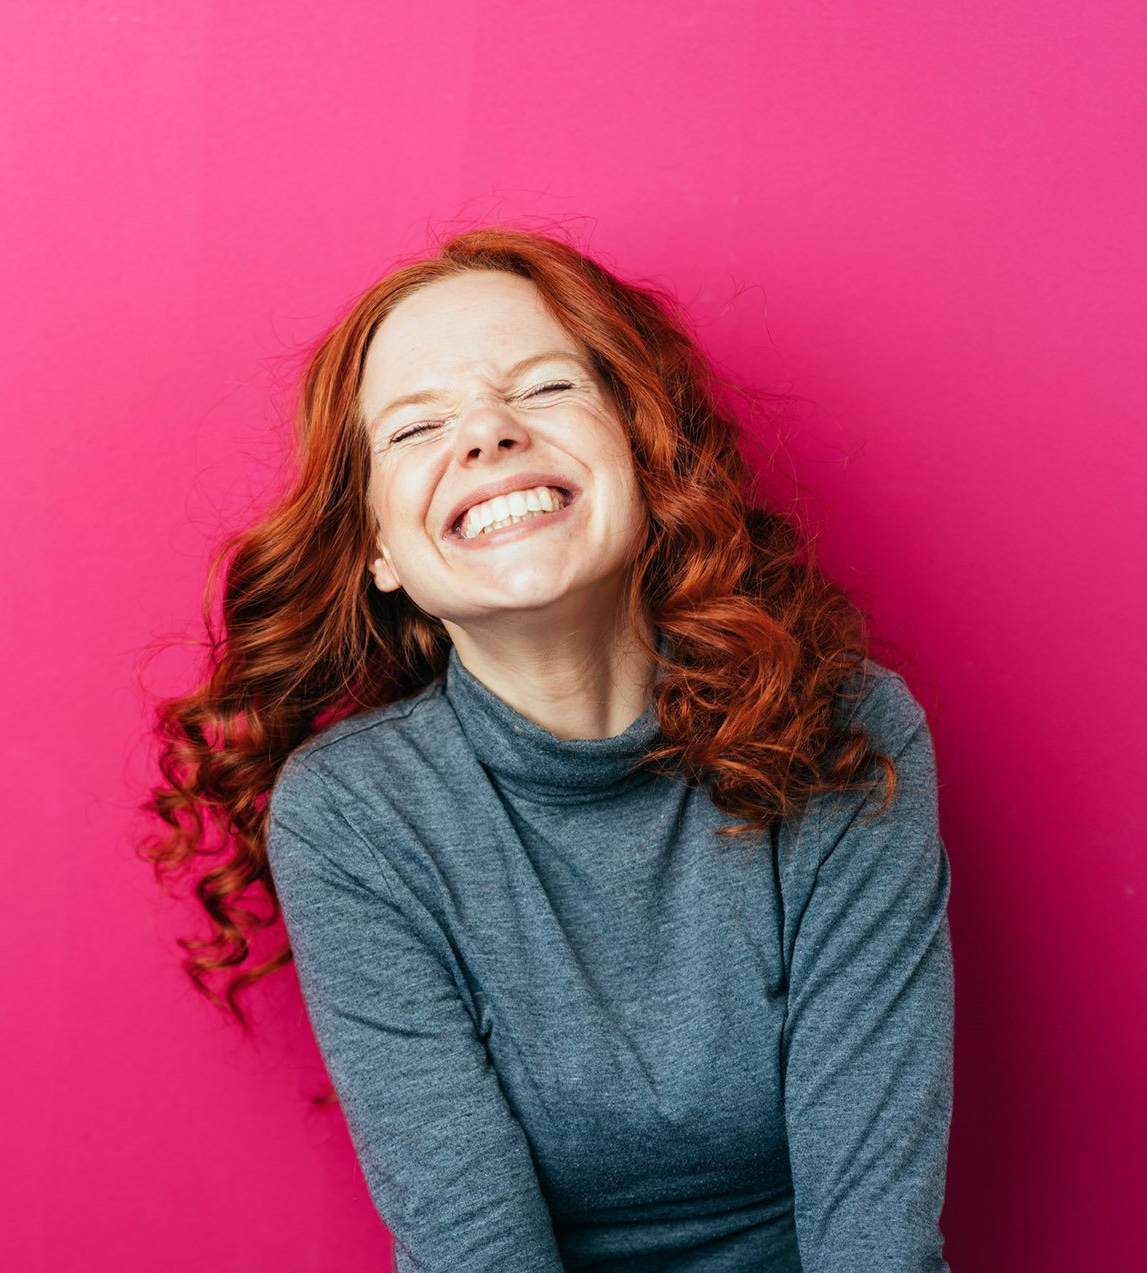 Red hair woman smiling